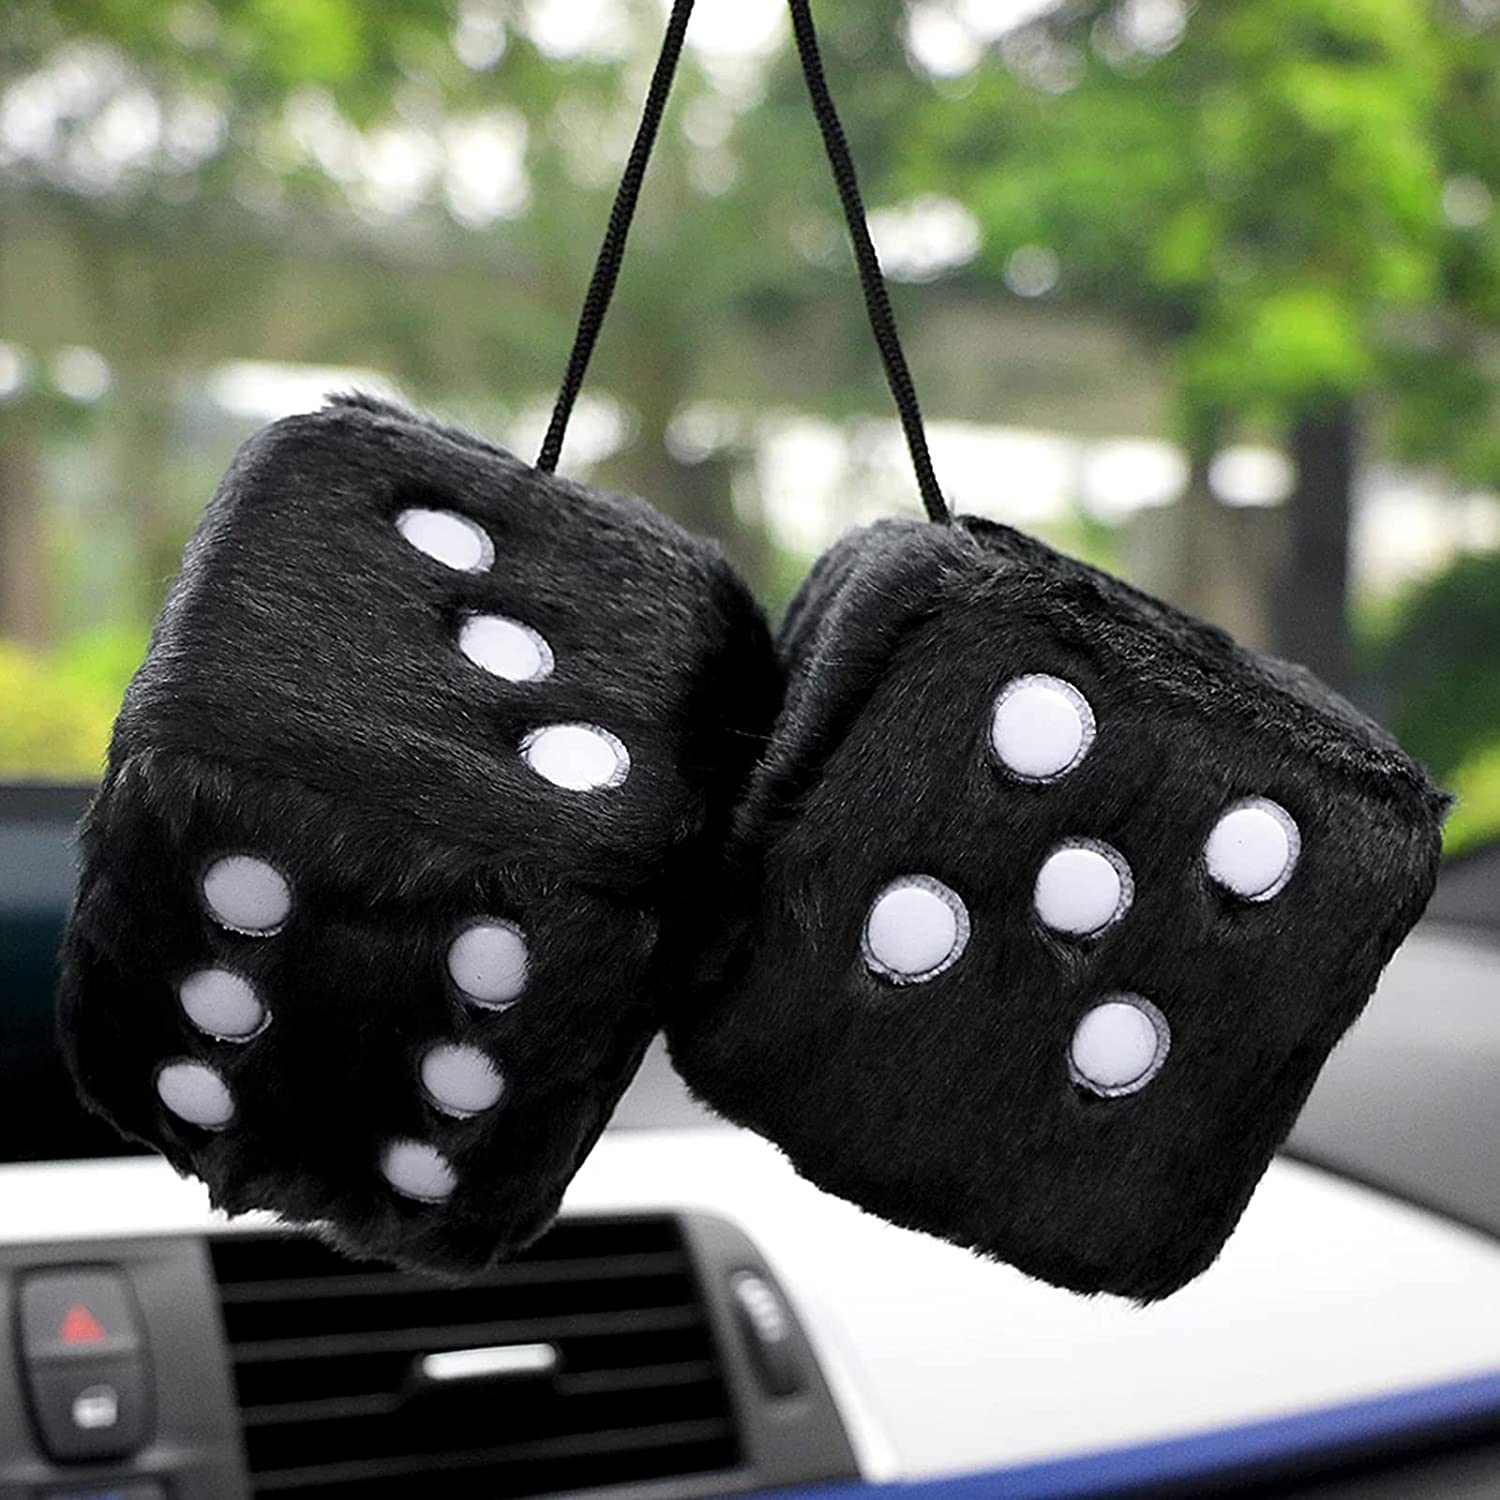 Add Some Fun To Your Car With These 2.36inch Furry Dice - Perfect For Interior Decoration